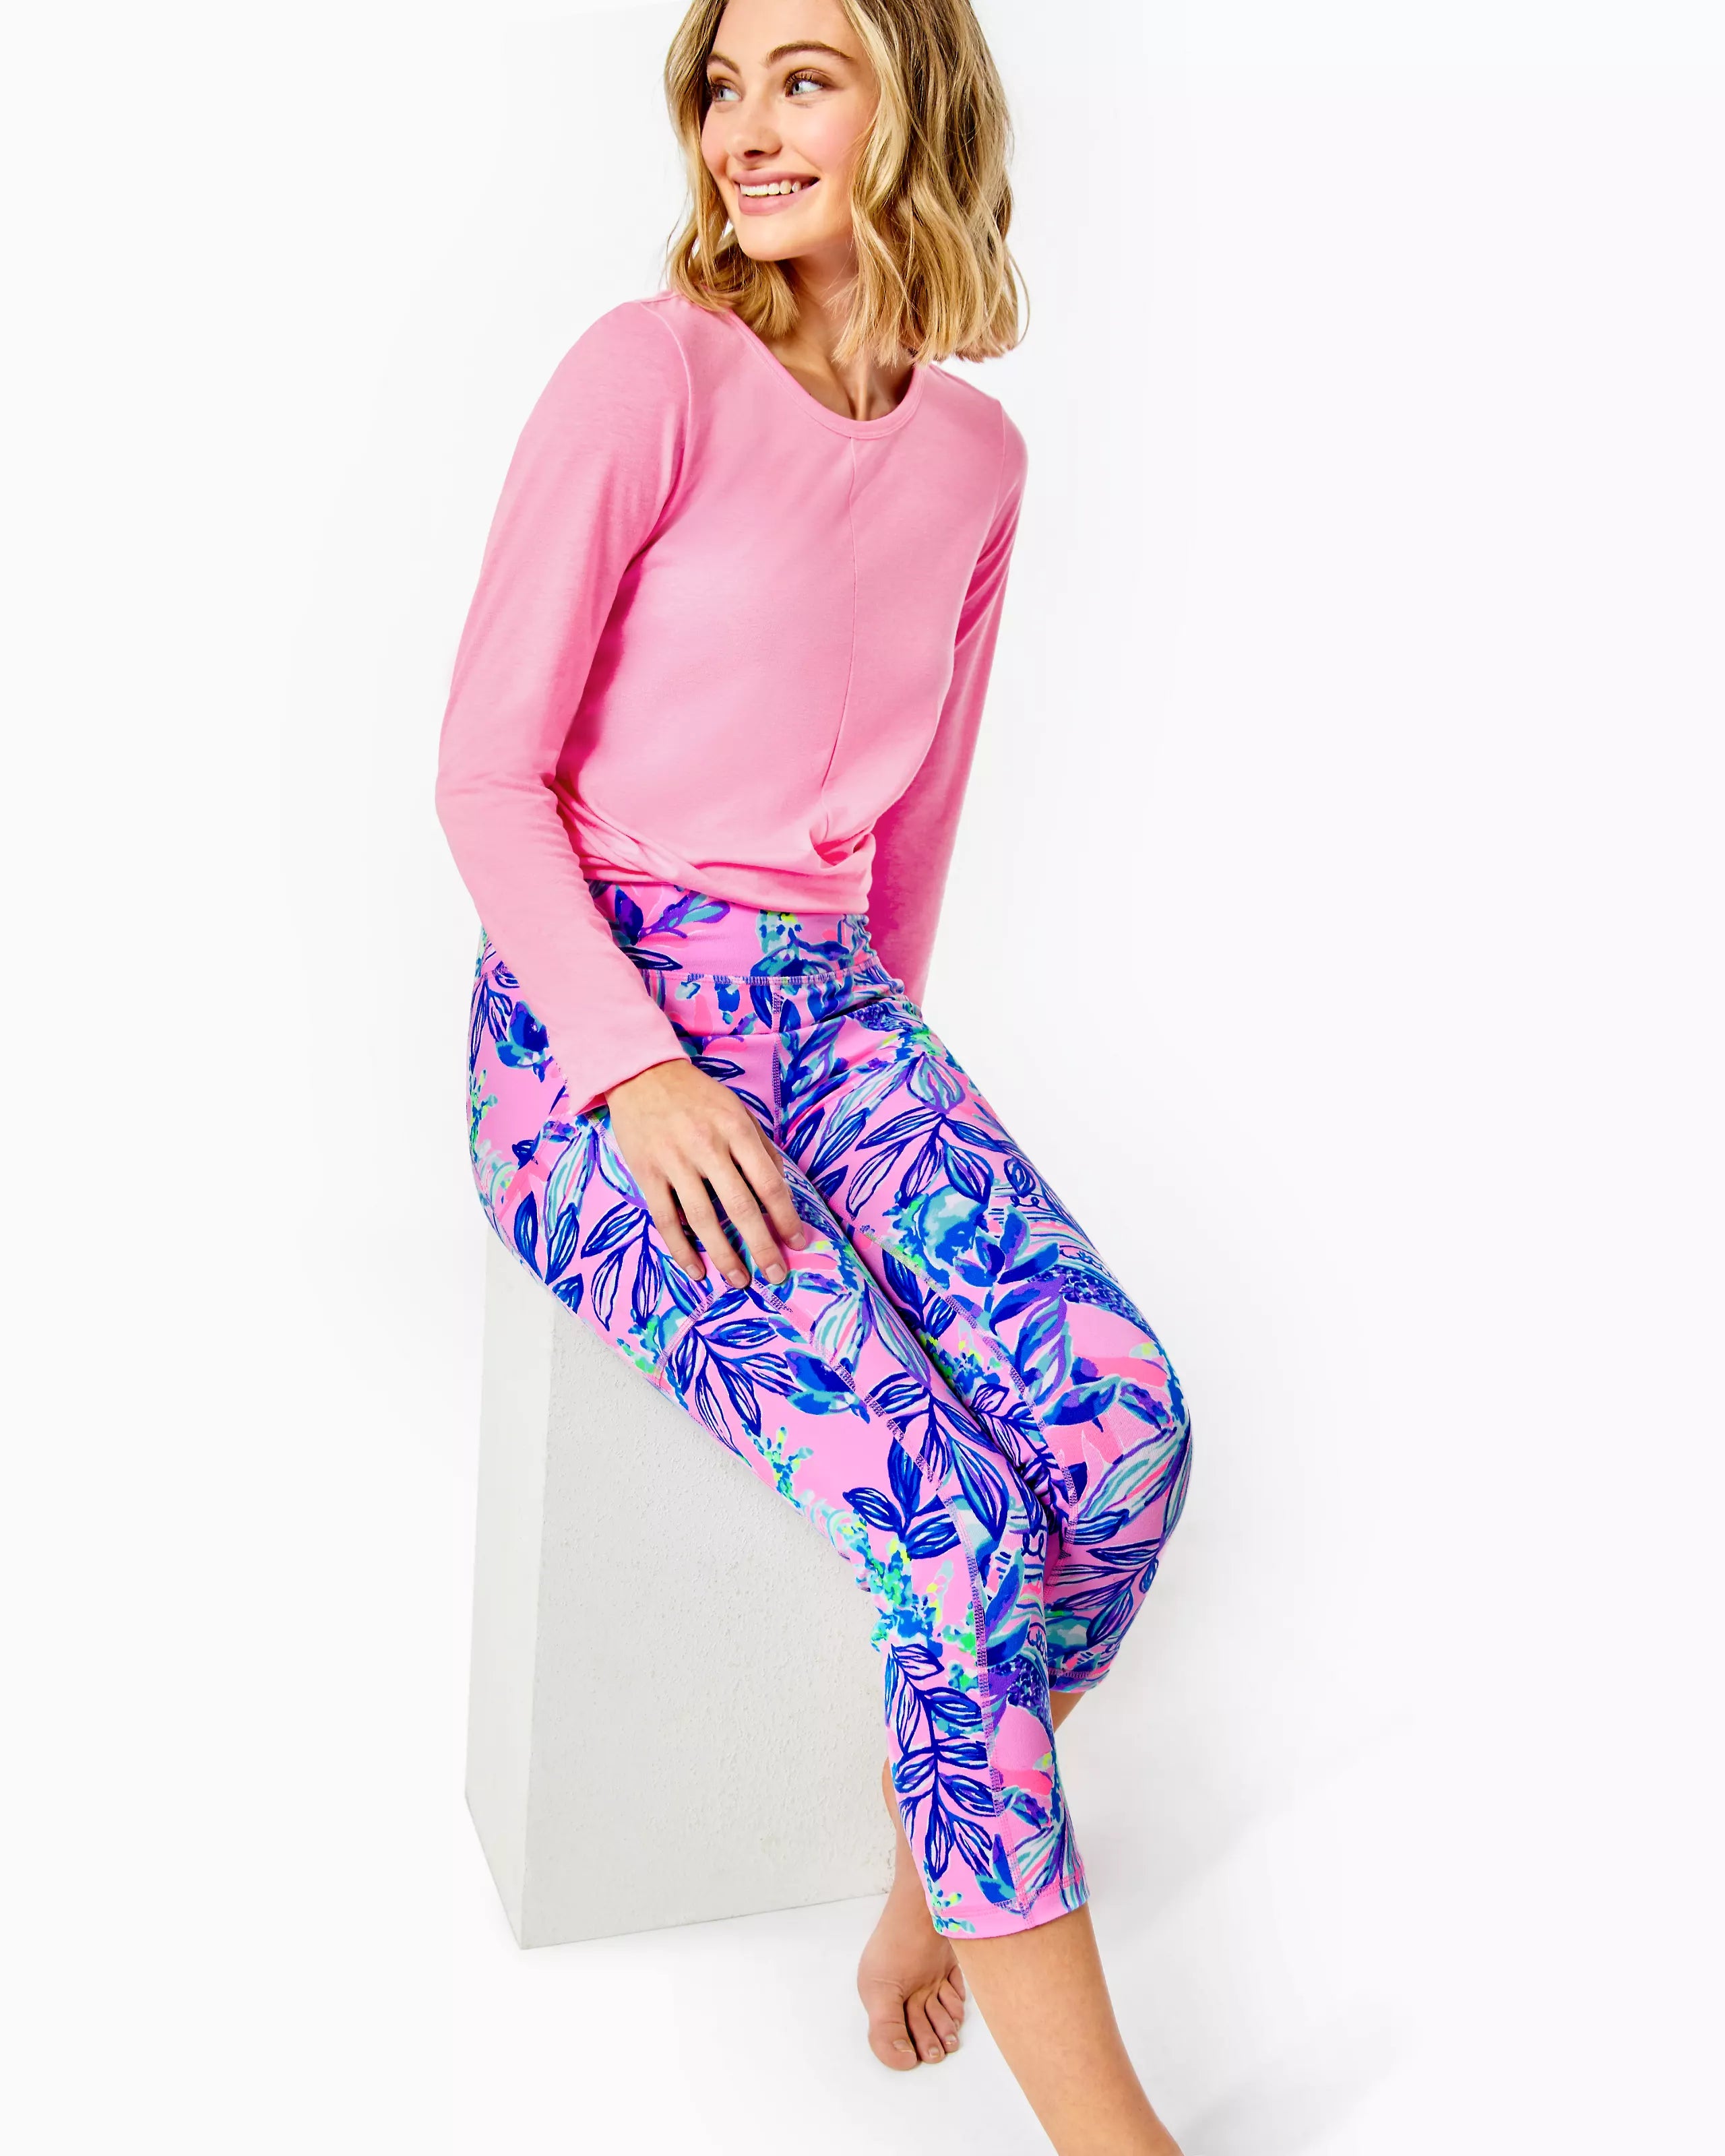 Stay stylish with these Lilly Pulitzer Leggings